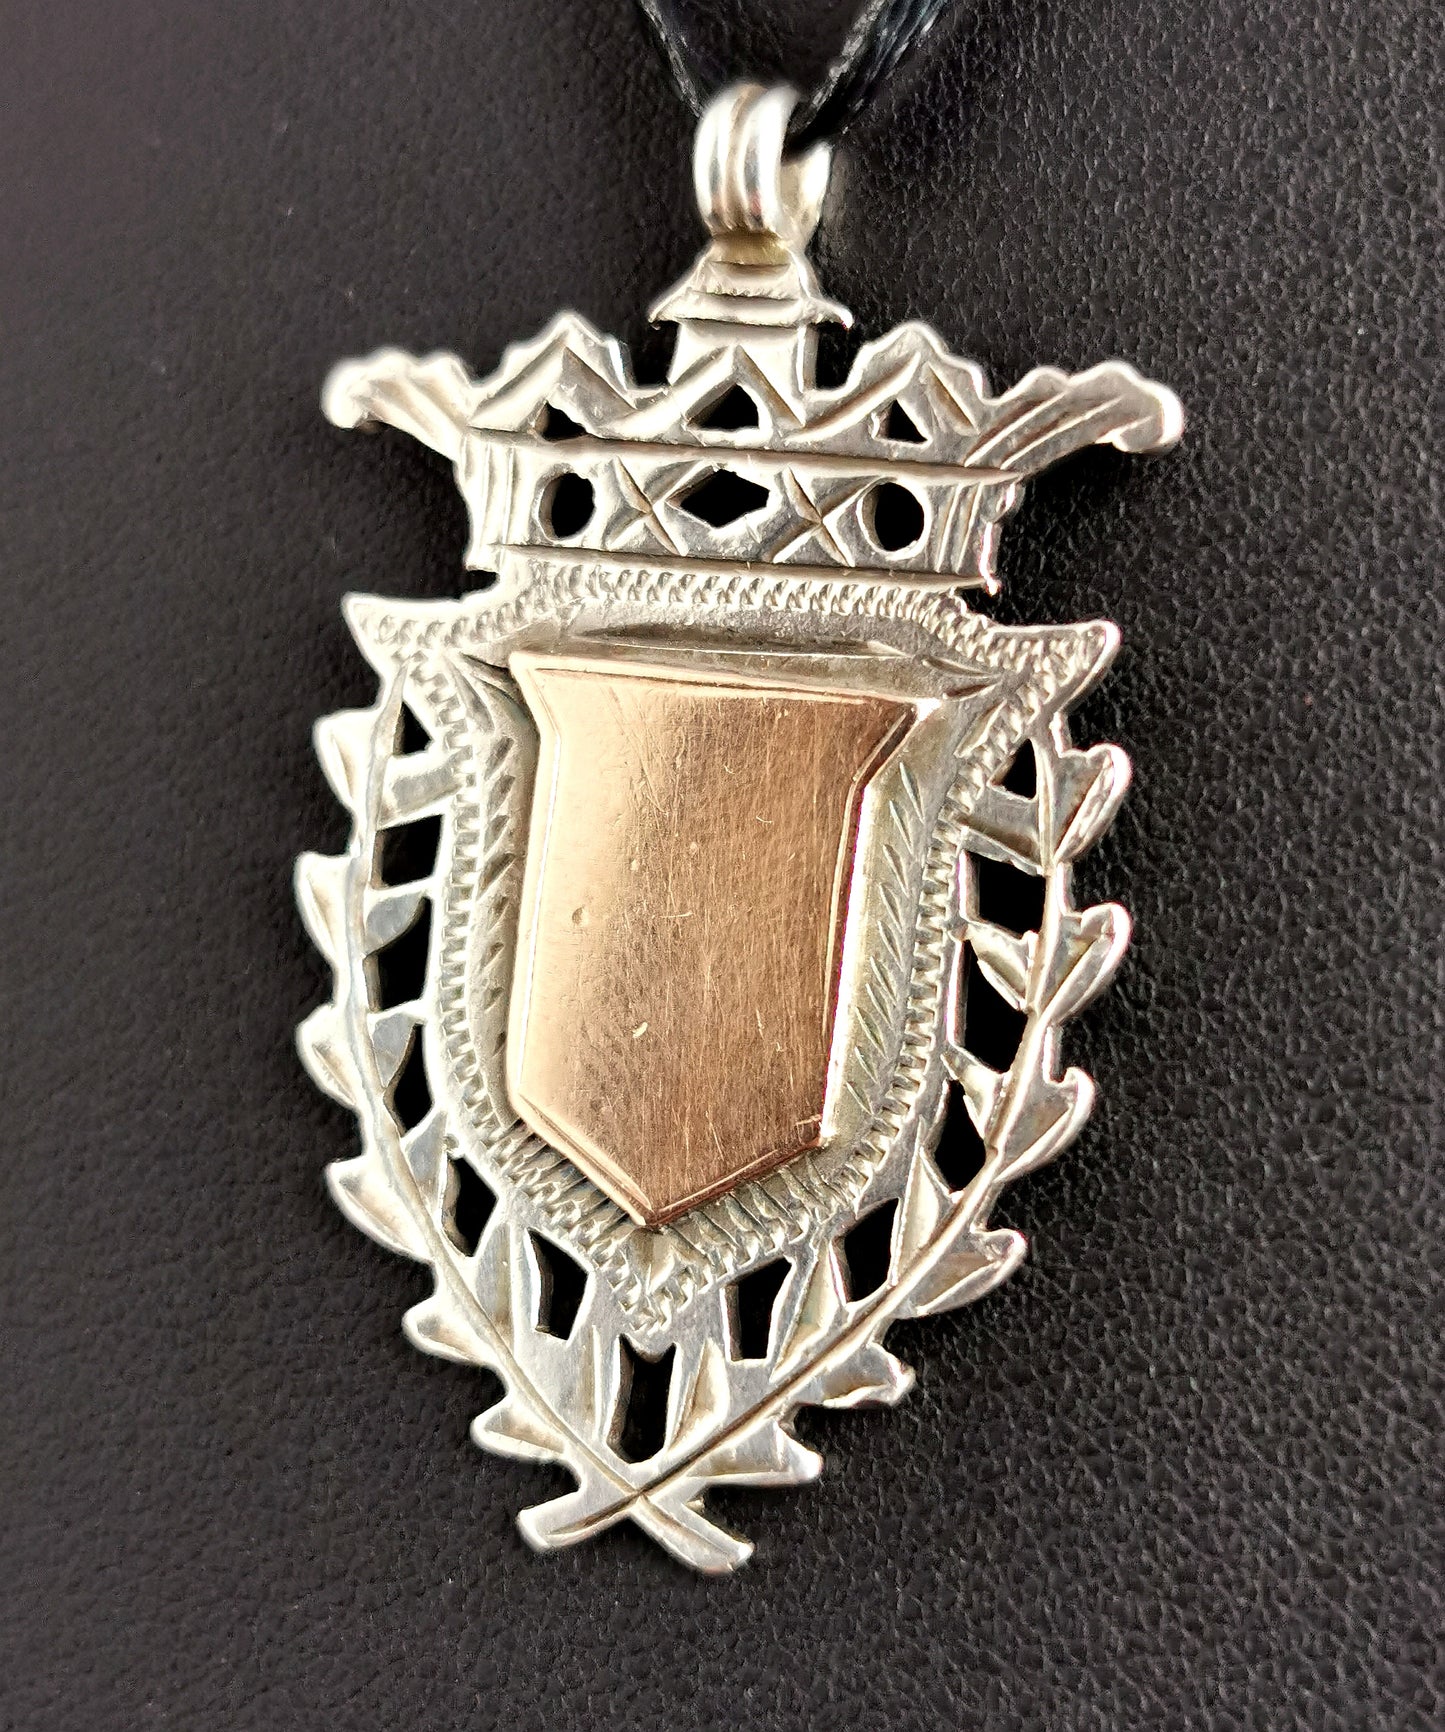 Antique Edwardian silver shield fob pendant, watch fob, 9ct Rose gold